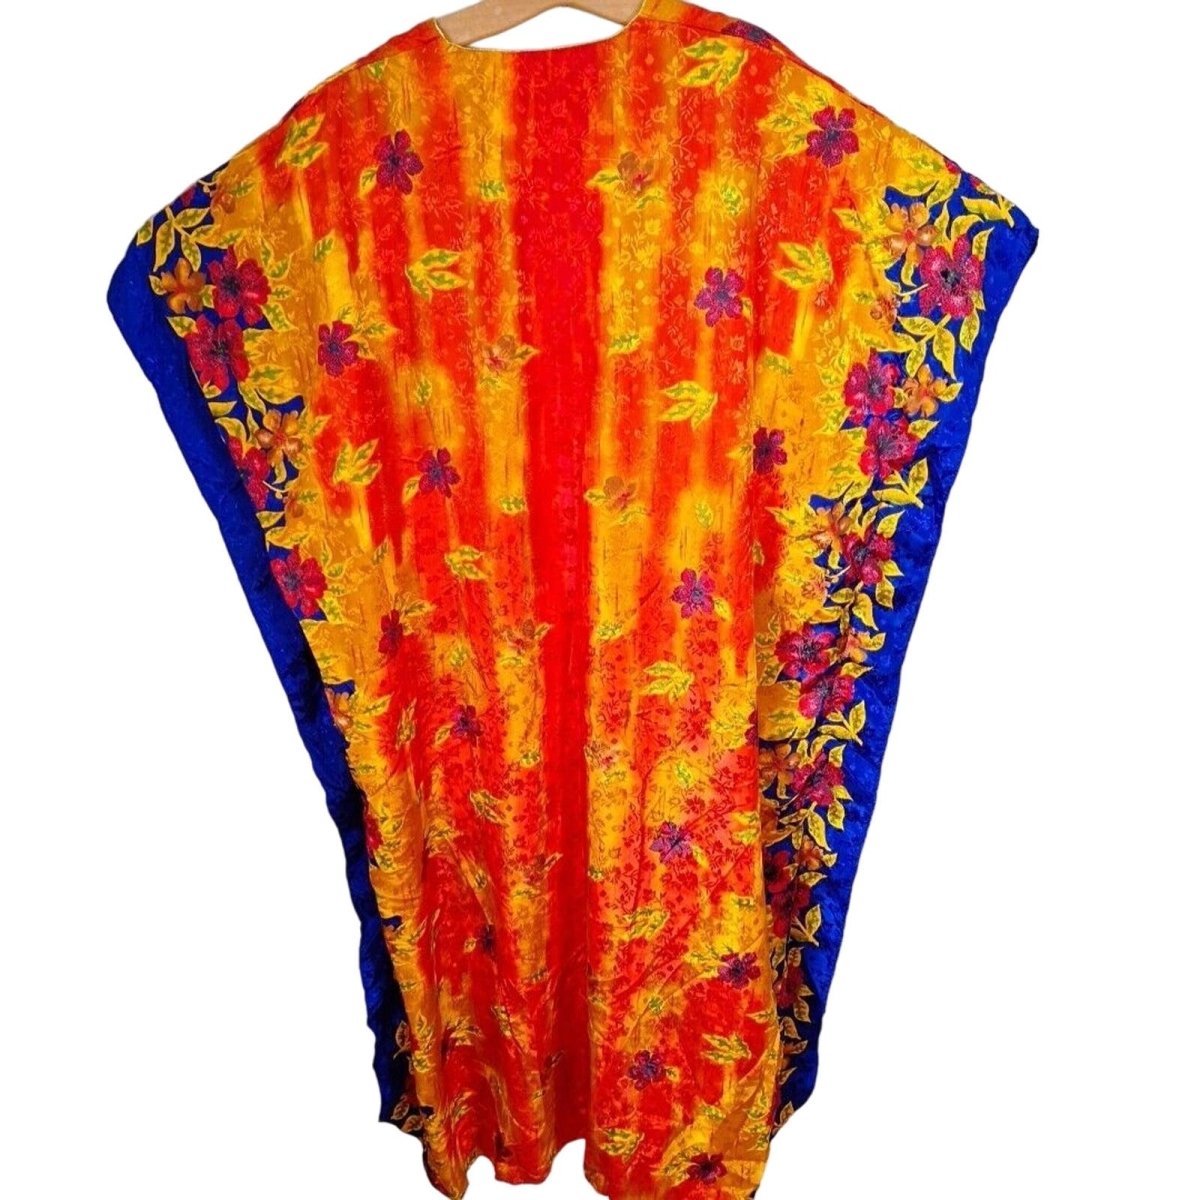 Deadstock Vintage 80s Sunset Orange, Yellow Blue Floral Kaftan One Size - themallvintage The Mall Vintage